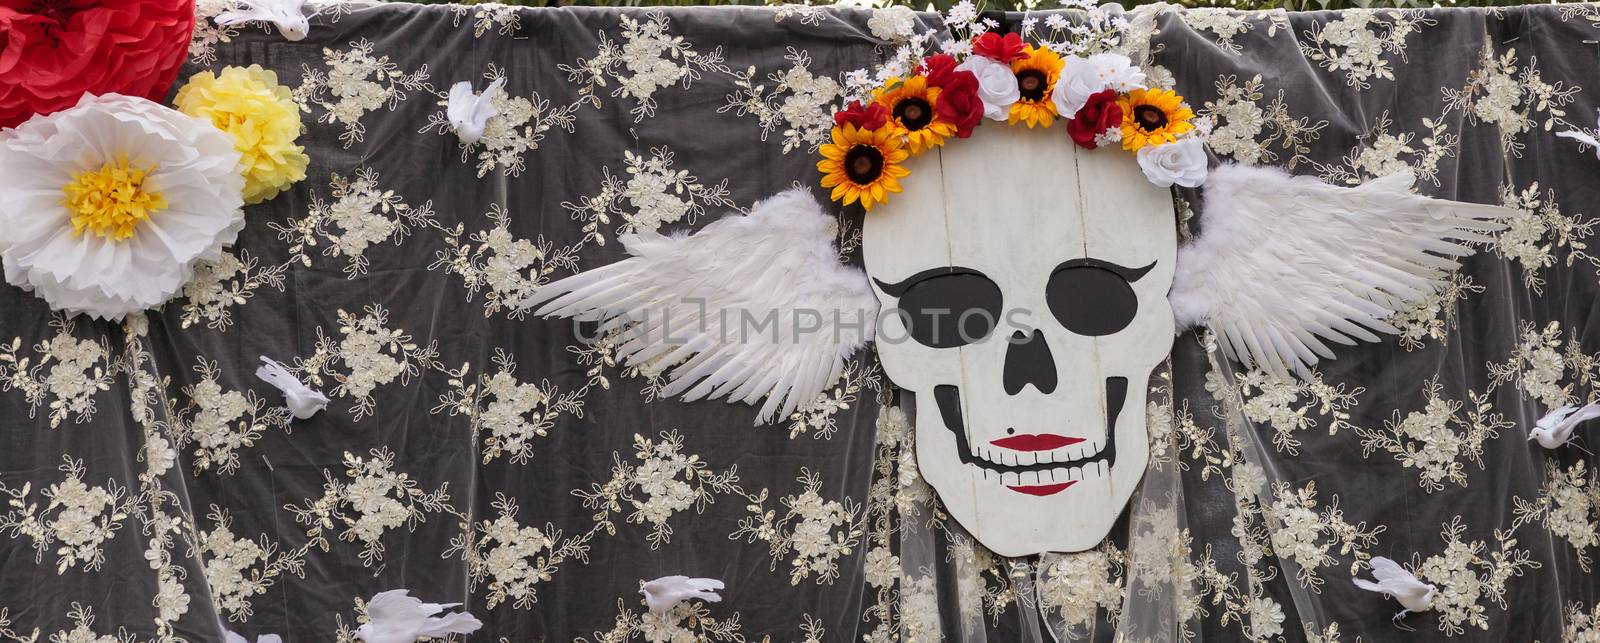 Flower and skeleton alter at Dia de los Muertos, Day of the dead.